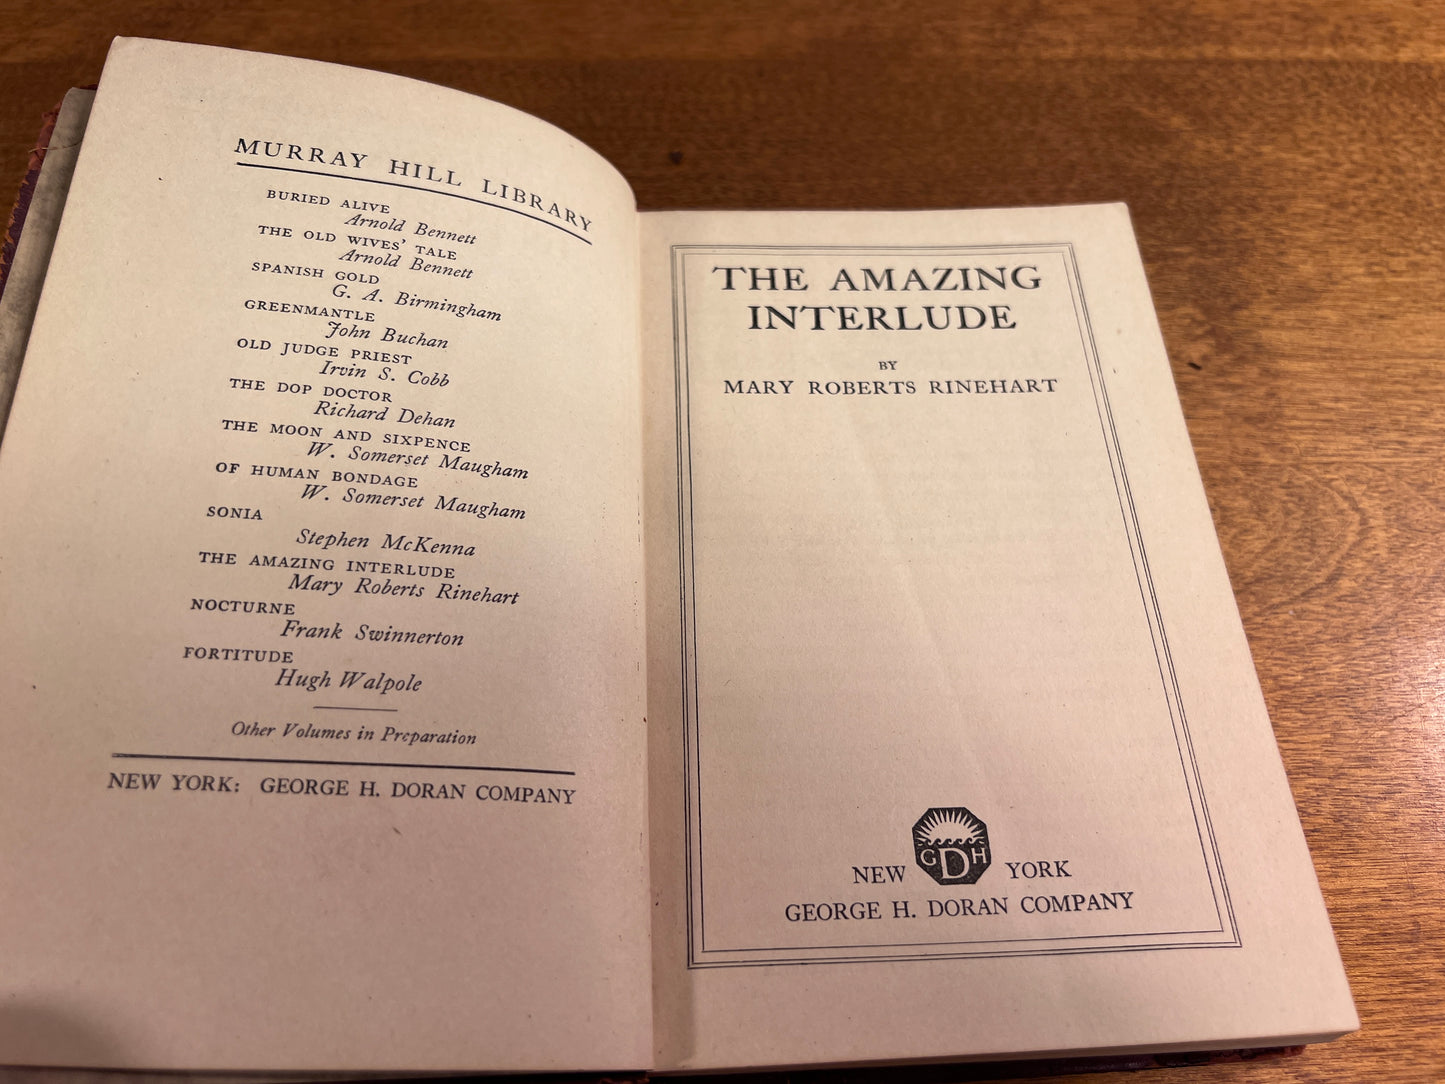 The Amazing Interlude by Mary Roberts Rinehart [Murray Hill Library, 1918]